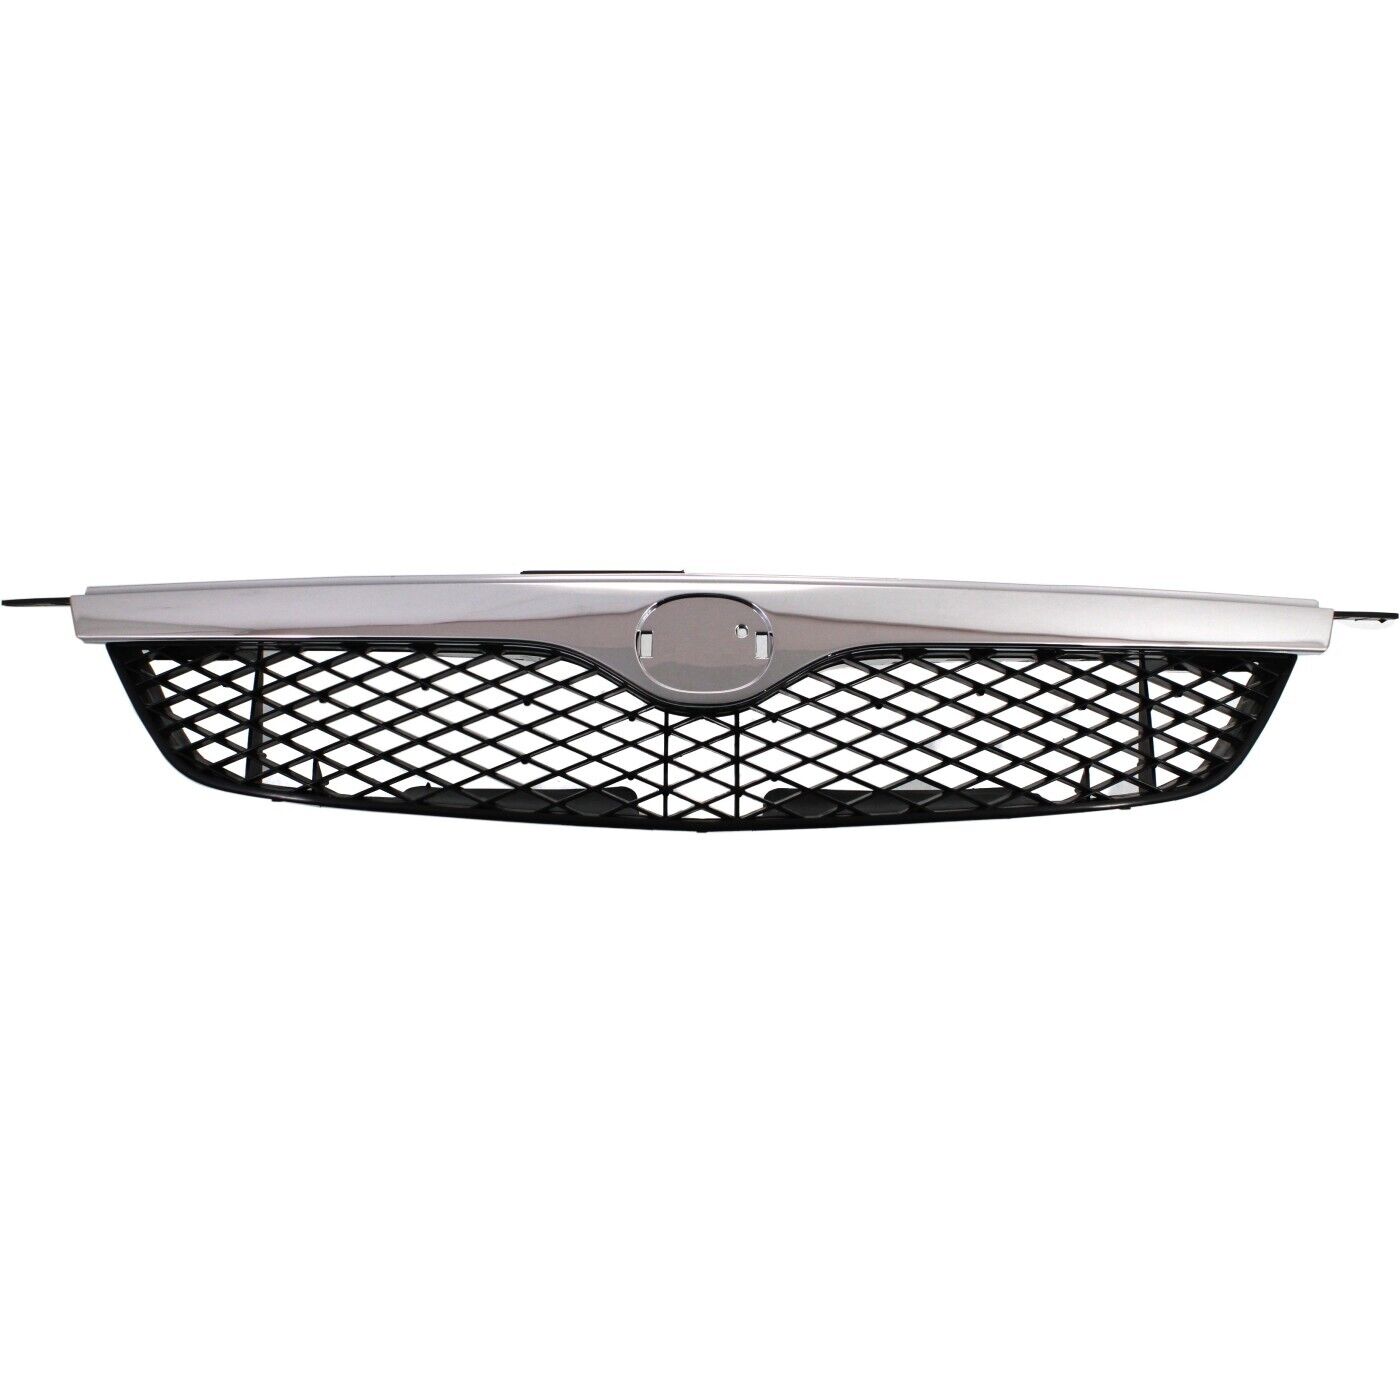 Grille Assembly For 1999-2000 Mazda Protege w/ Chrome Molding